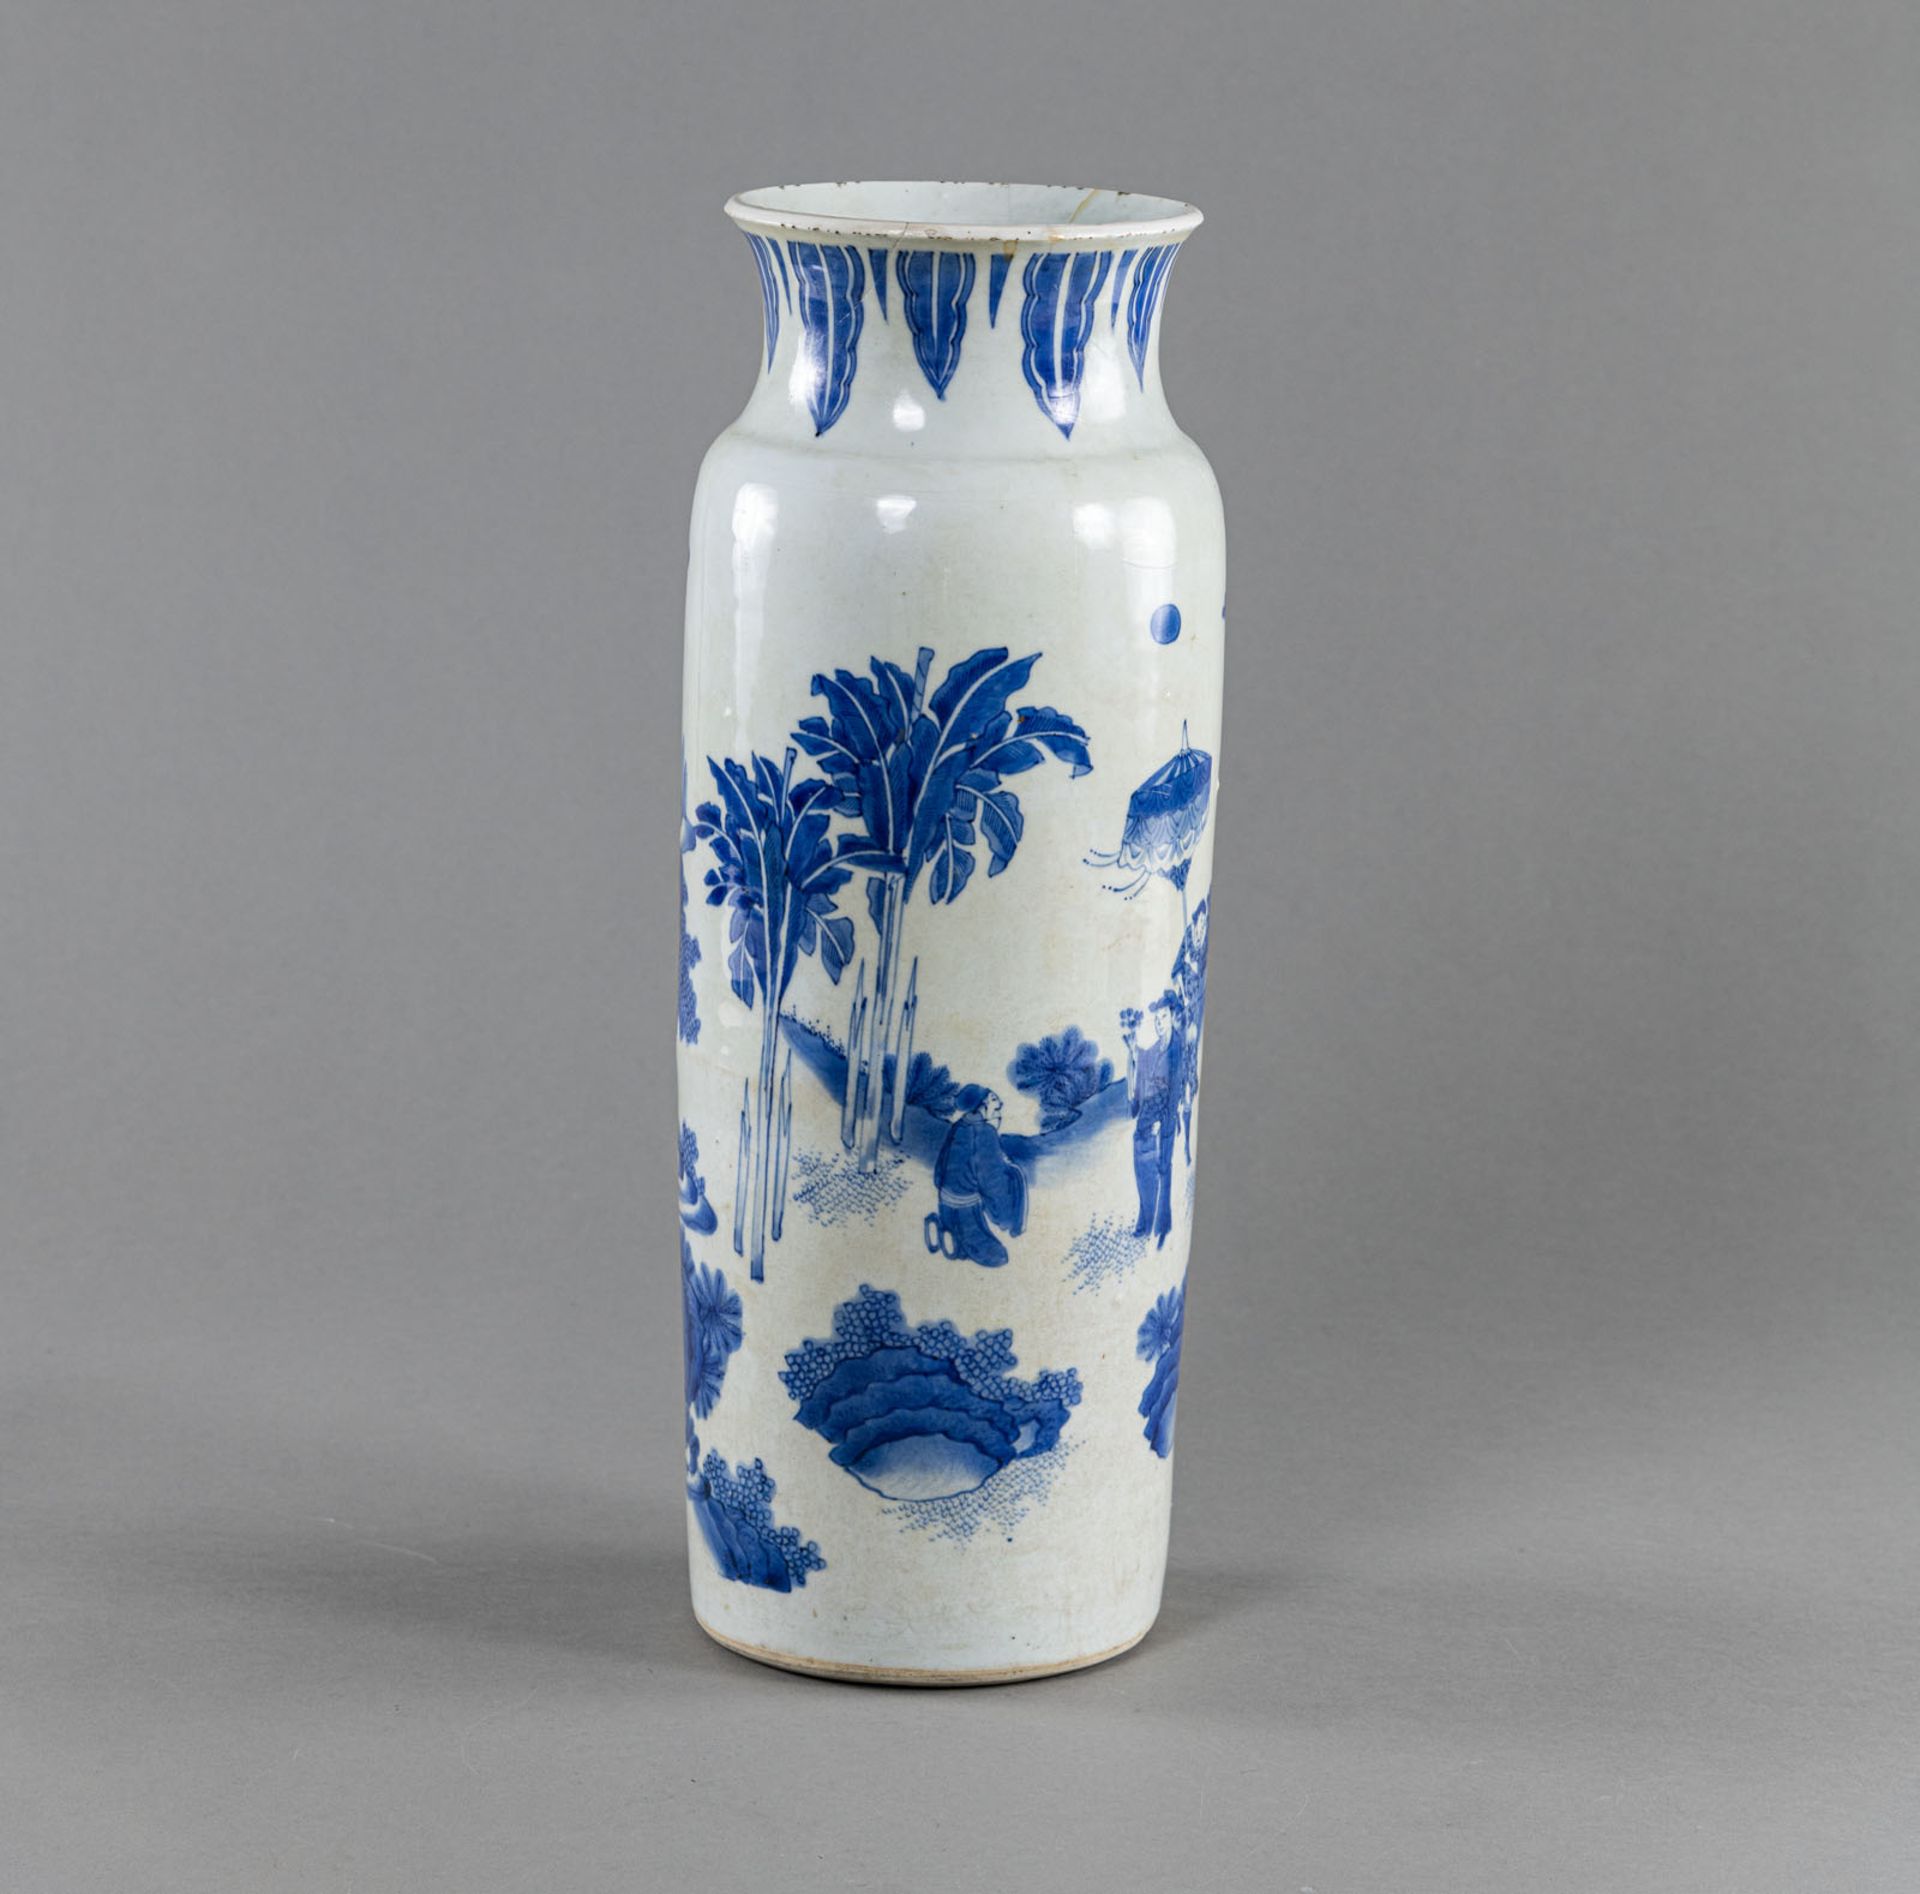 A BLUE AND WHITE ROULEAU VASE WITH A FIGURAL SCENE - Image 2 of 4